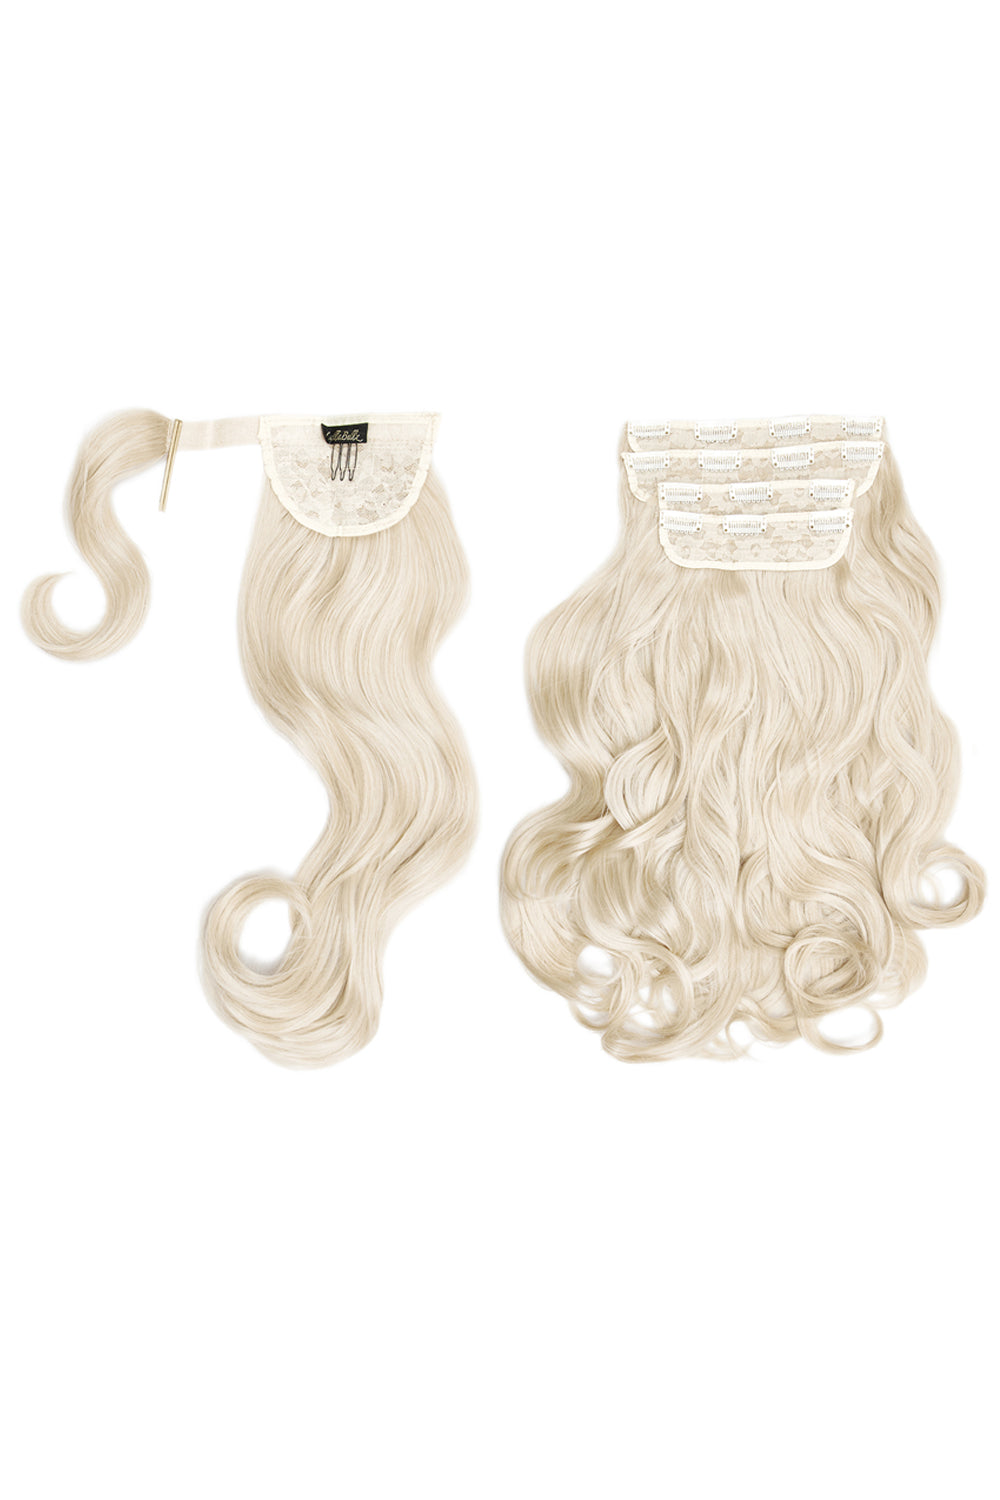 Ultimate Half Up Half Down 22’’ Curly Extension and Pony Set - Bleach Blonde